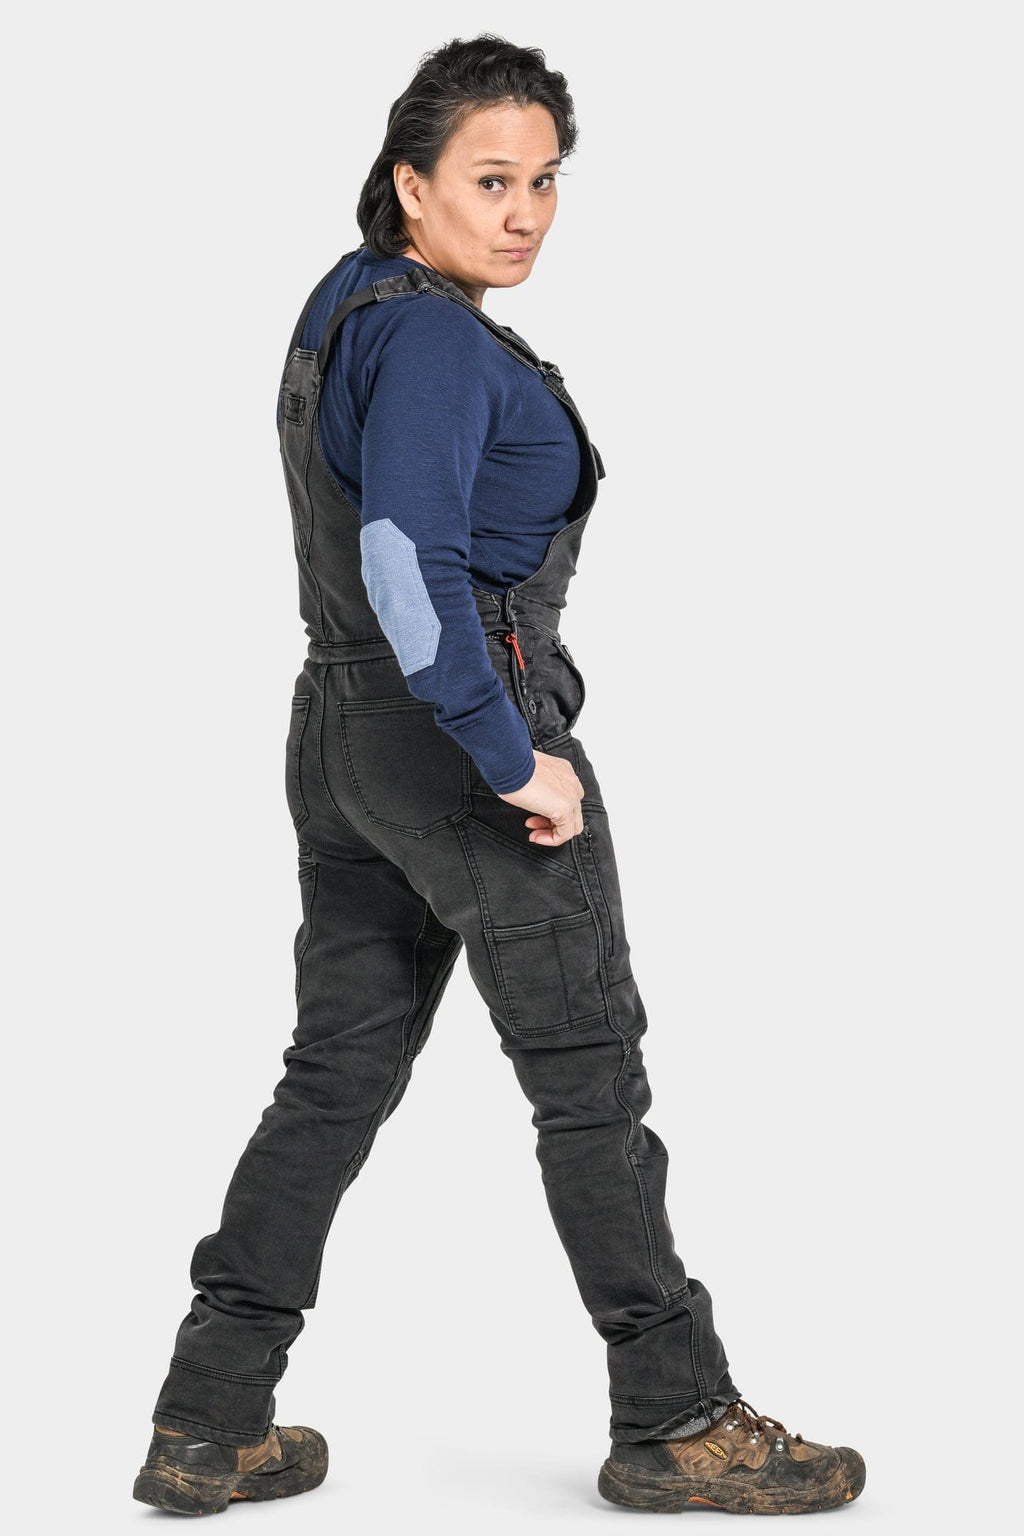 Freshley Drop Seat Overalls in Black Stretch Thermal Denim Dovetail Workwear